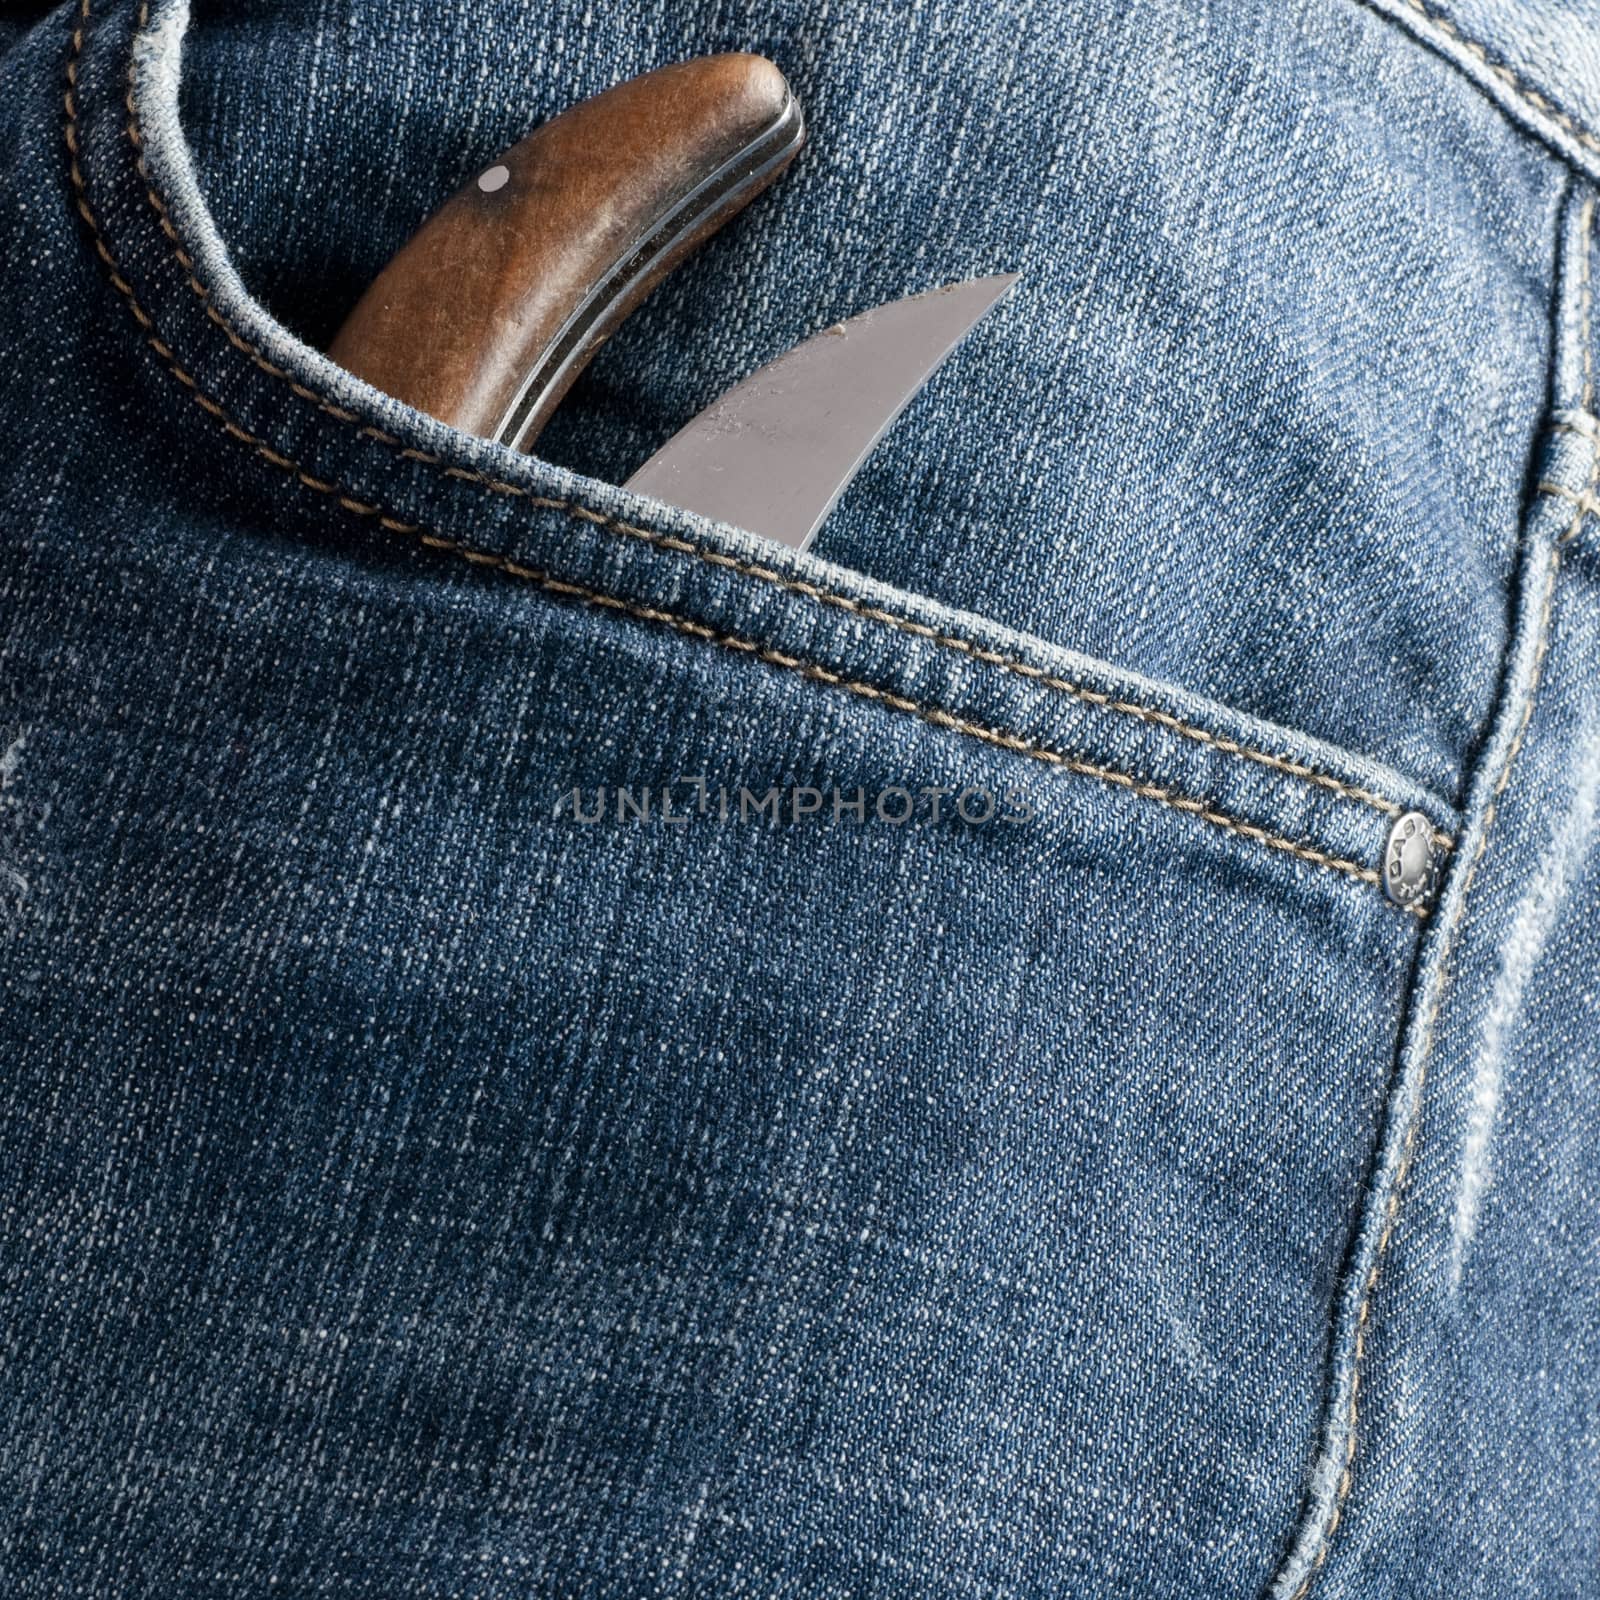 knife in the pocket in front of an old jeans